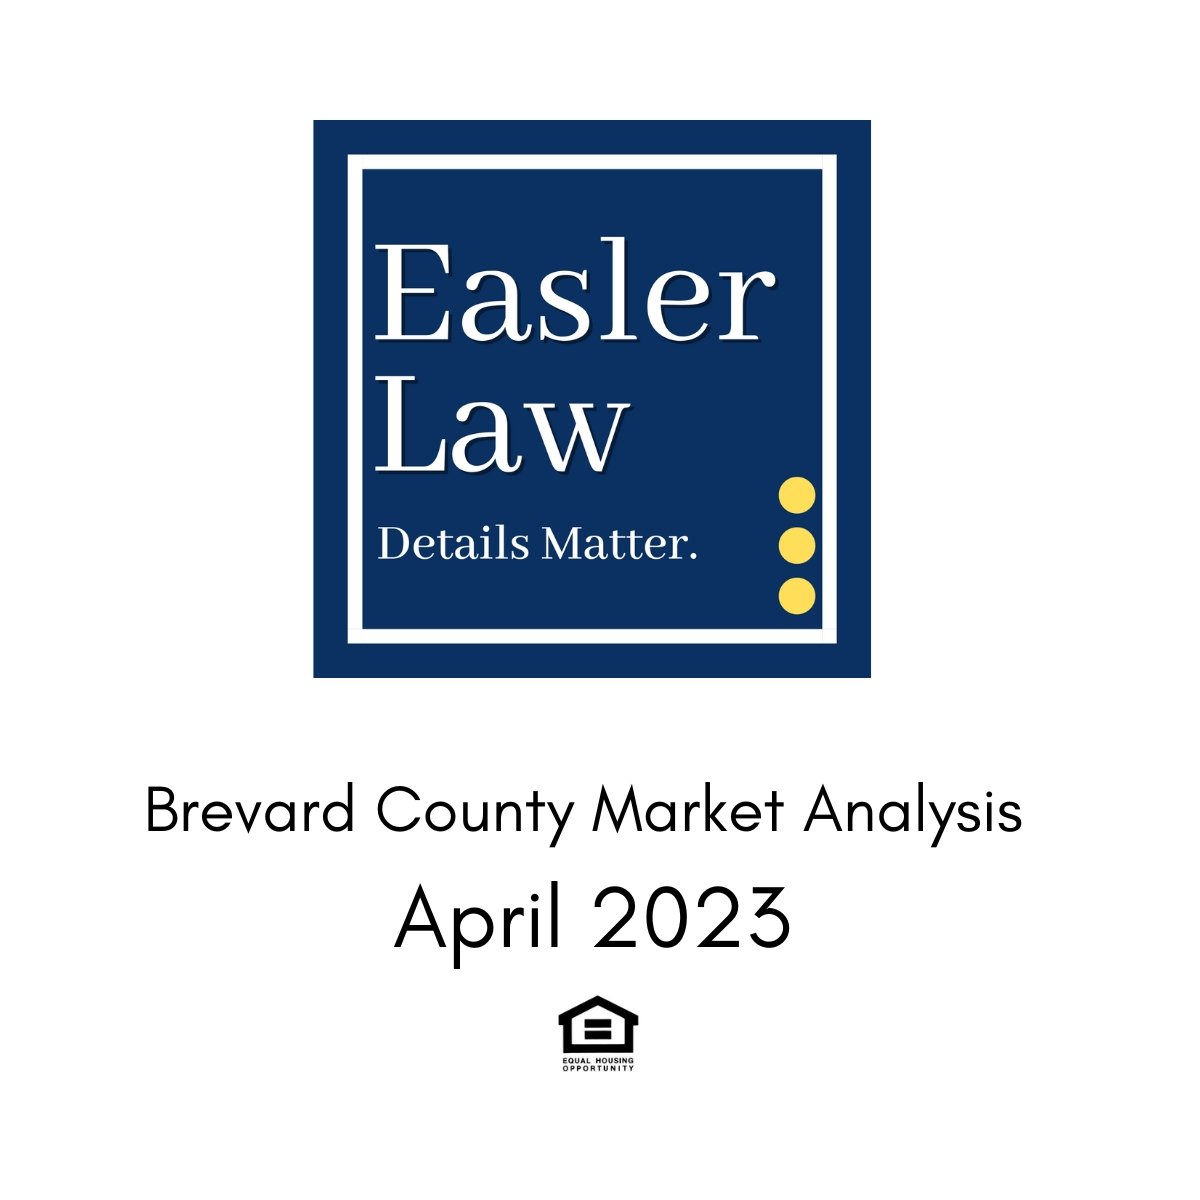 Brevard County Real Estate Market Analysis for April 2023